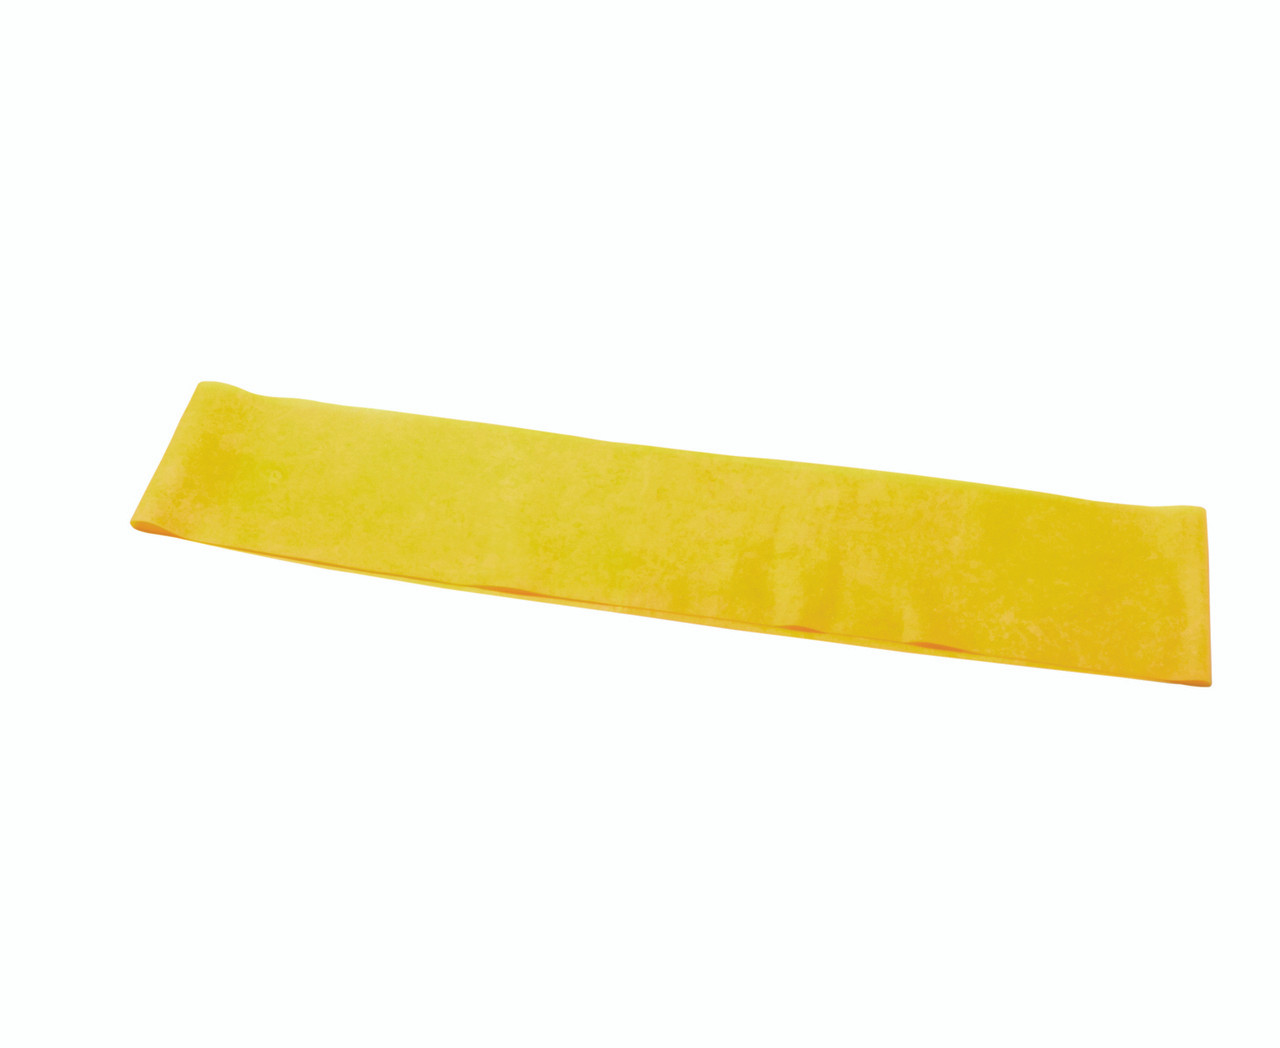 CanDo¨ Band Exercise Loop - 15" Long - Yellow - x-light